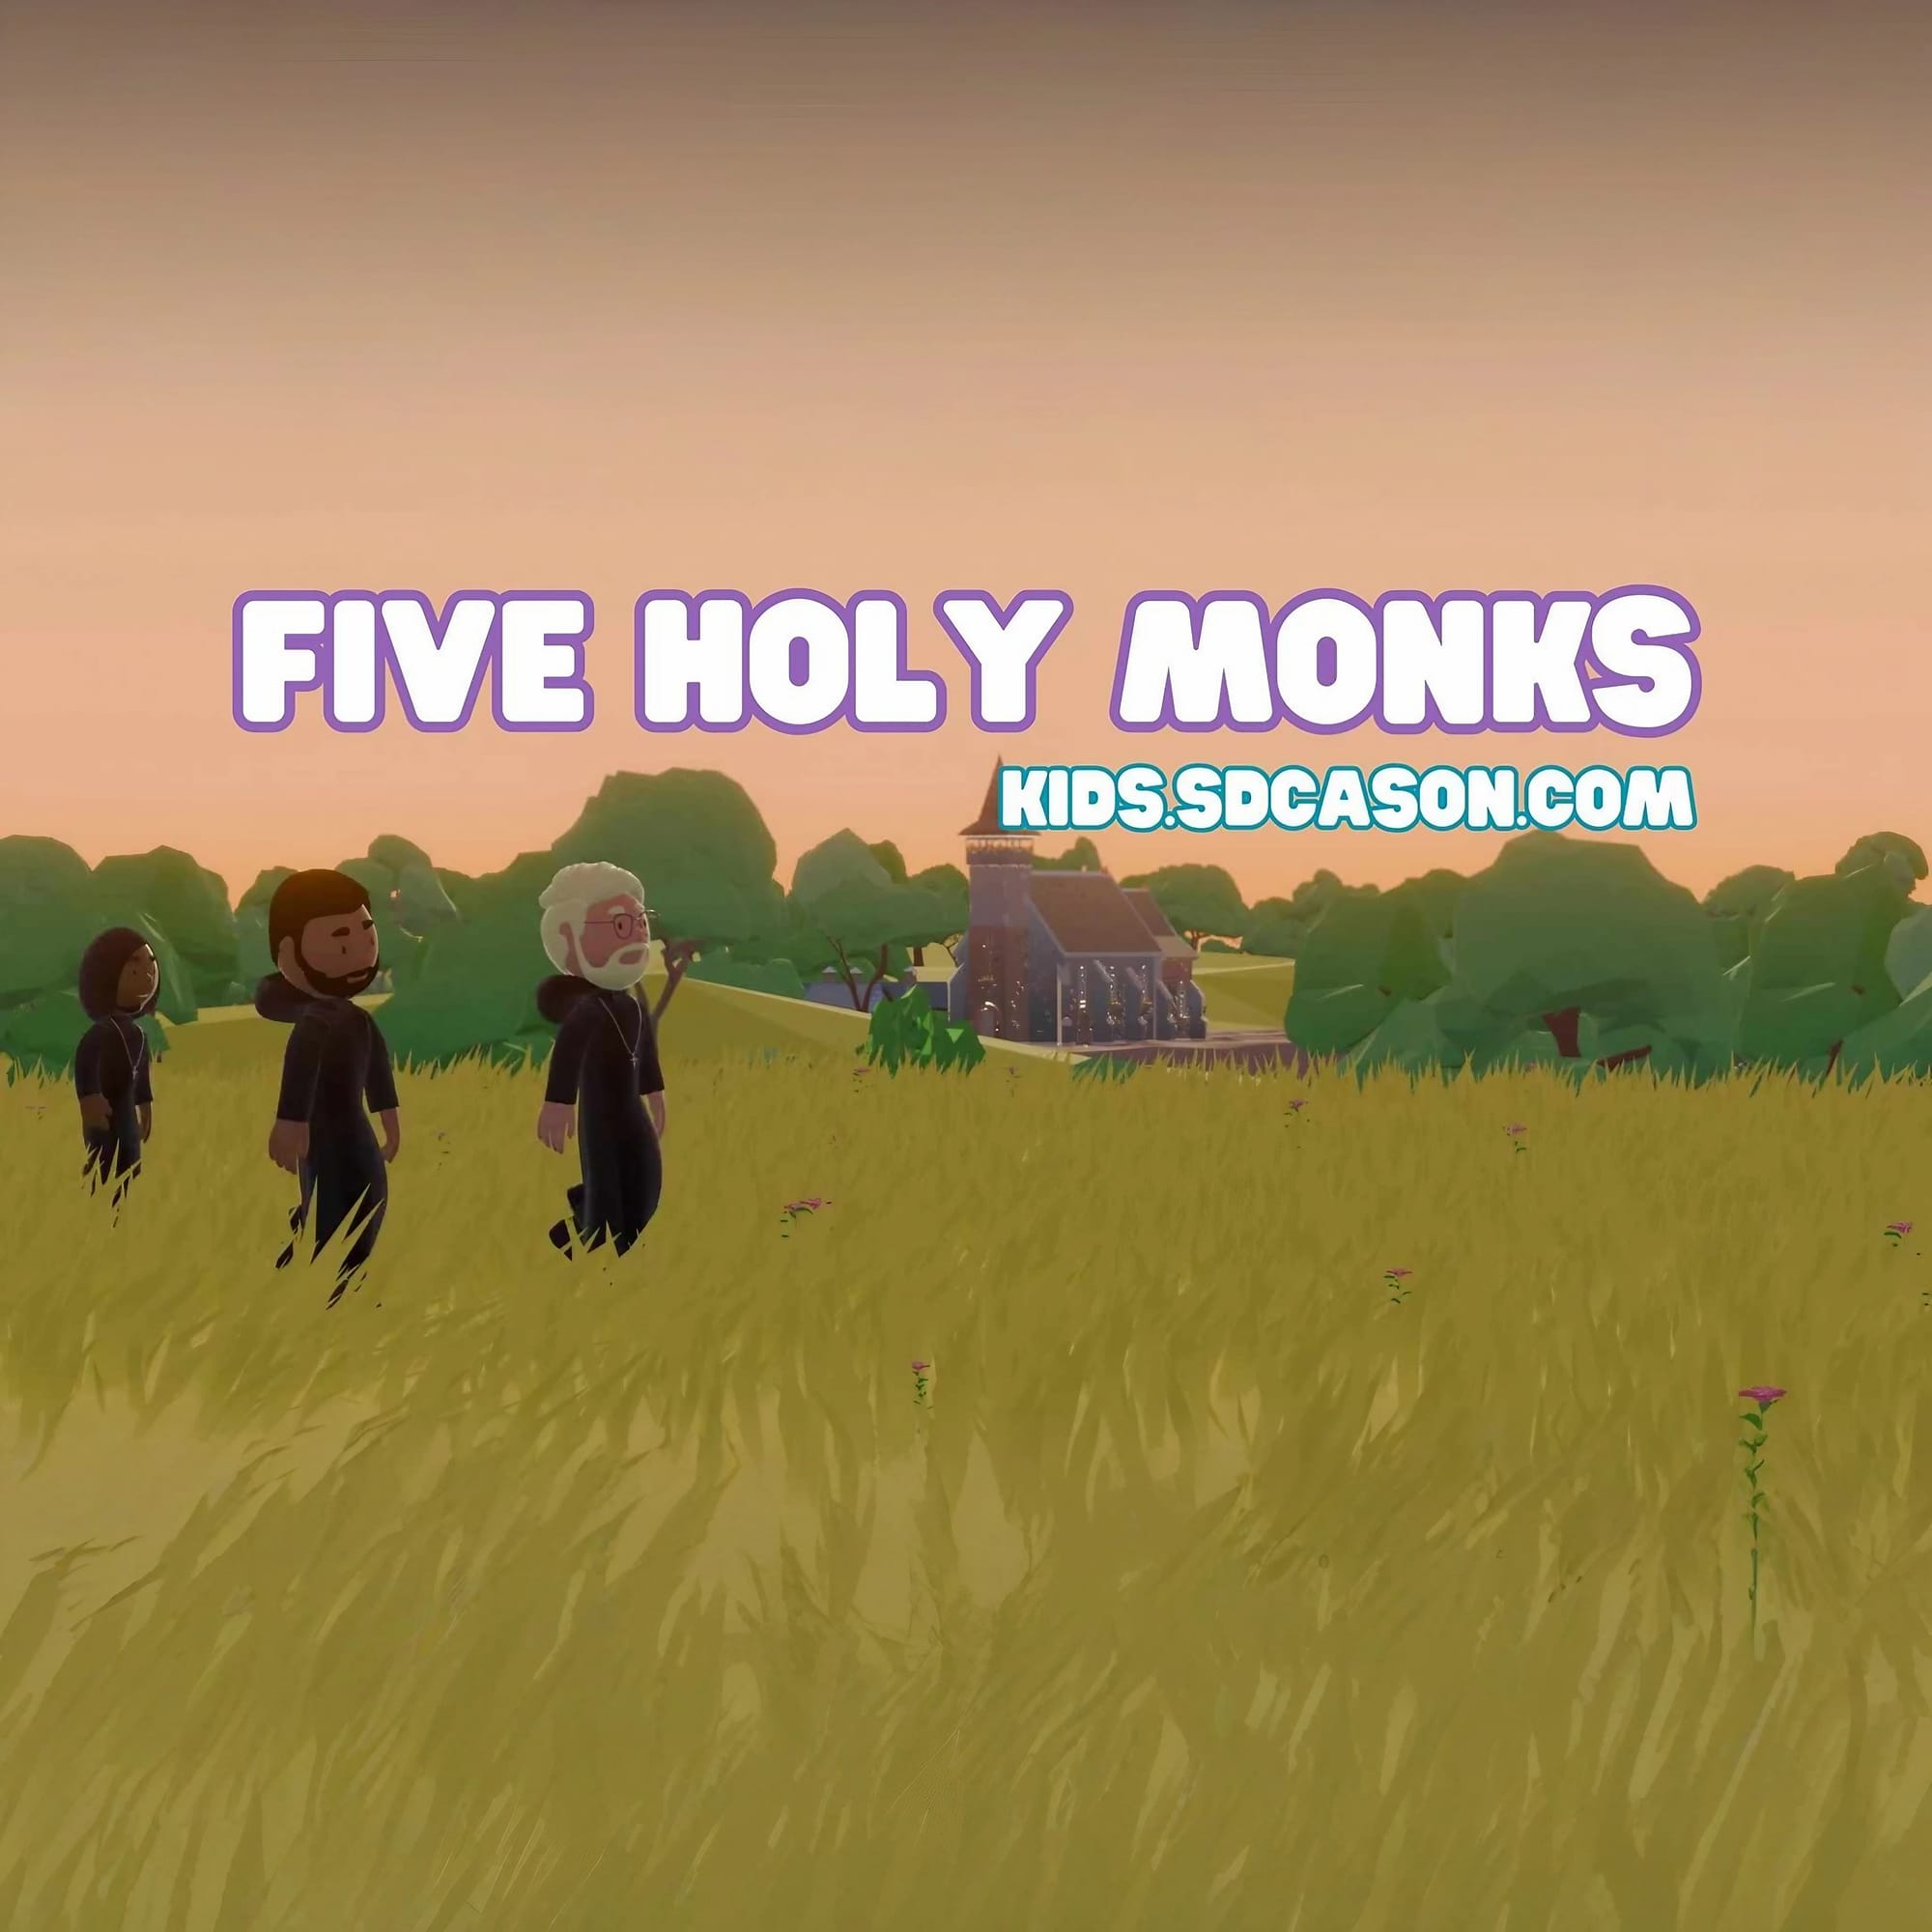 Five Holy Monks (New Version) - Free Catholic Song for Kids